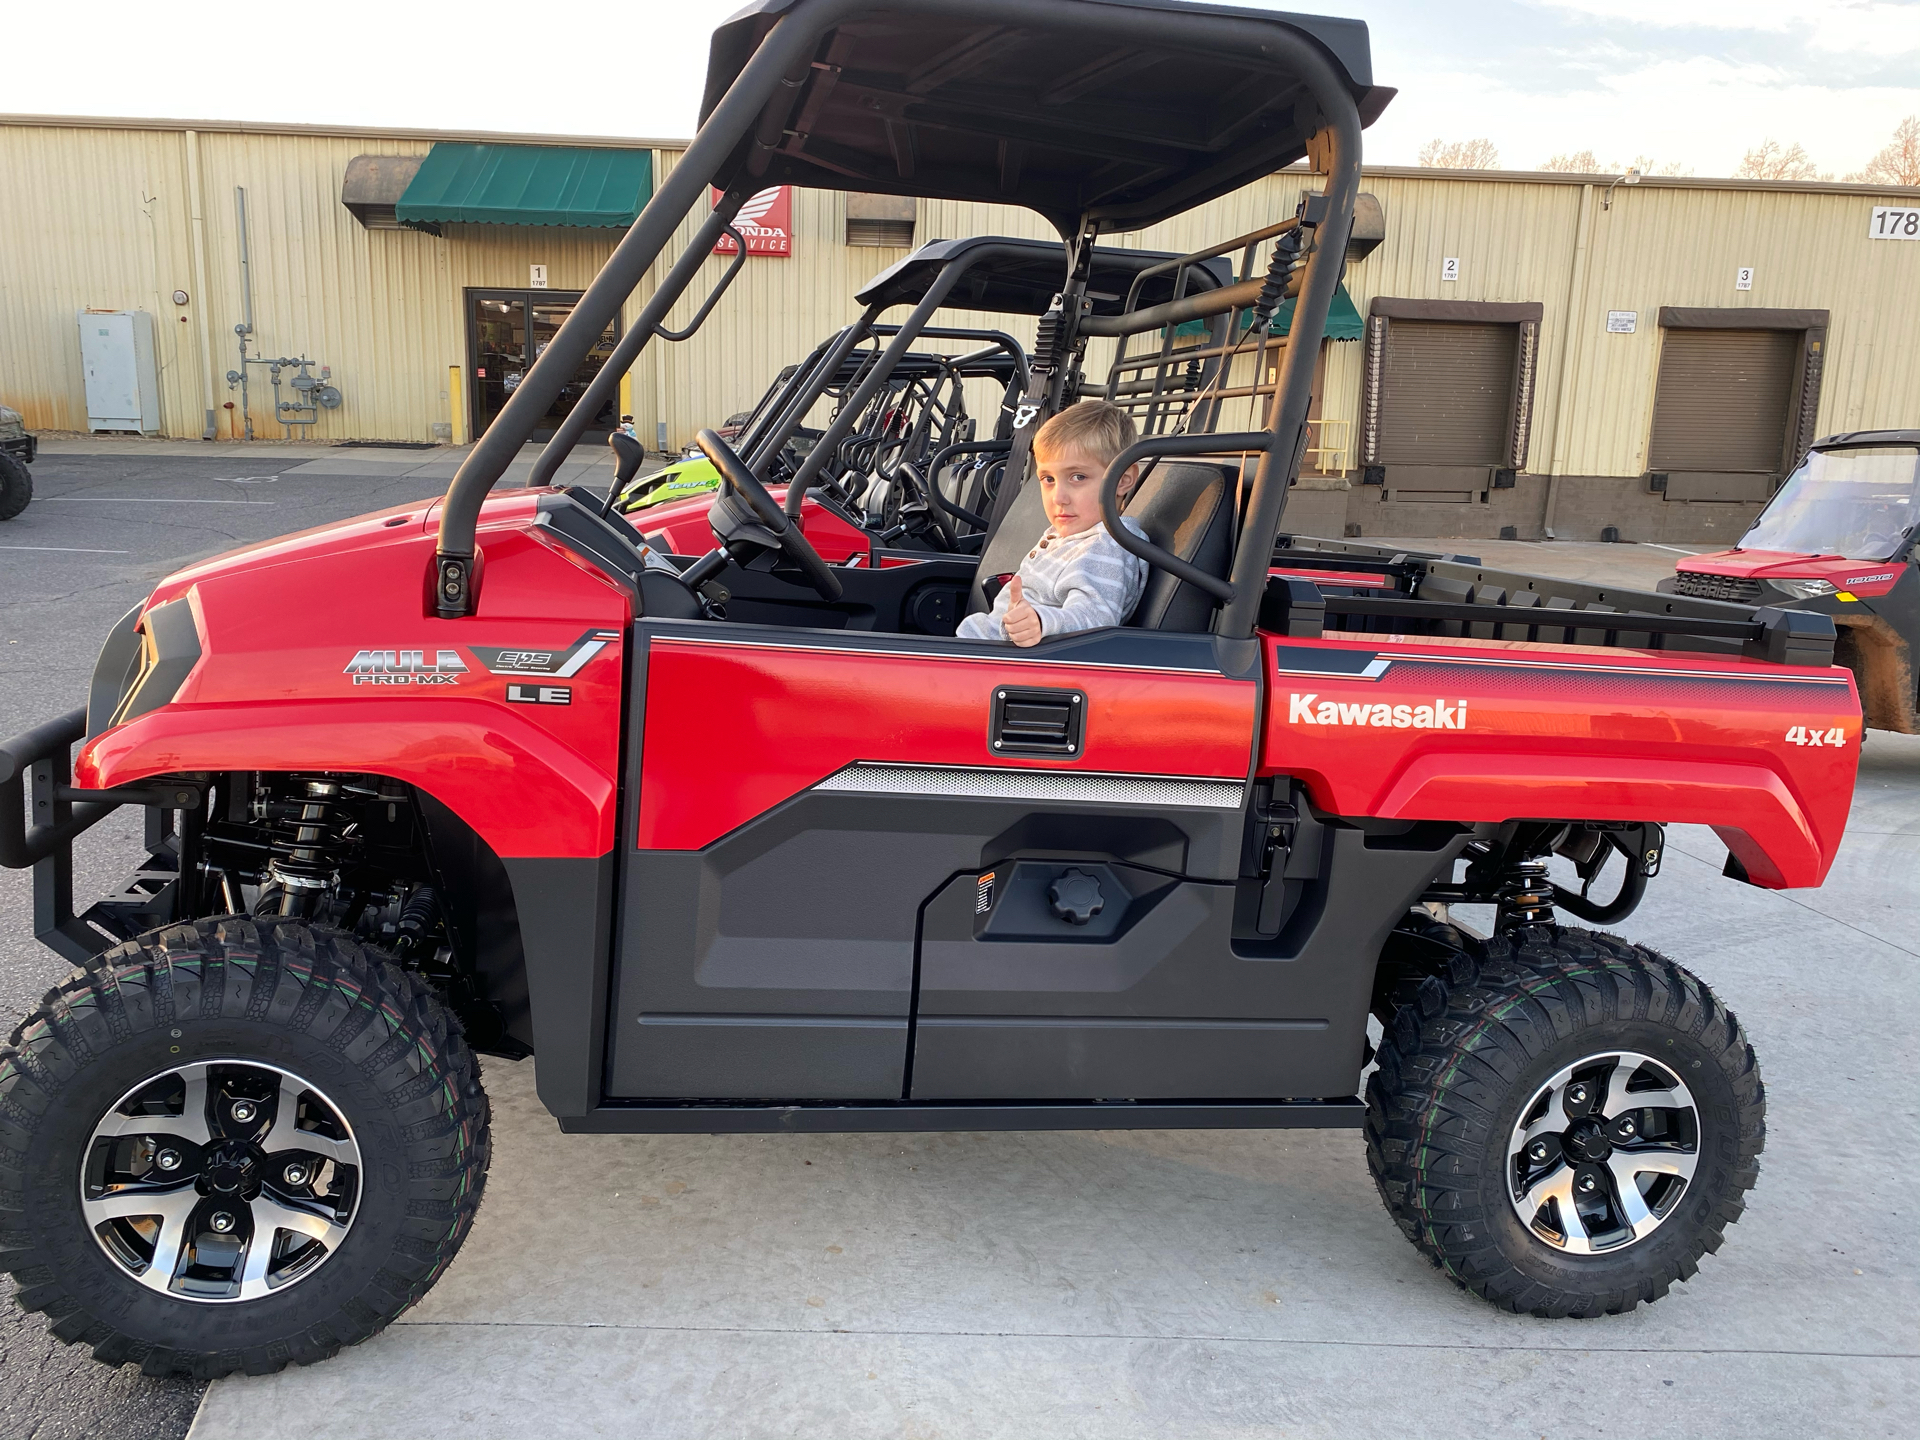 New 2021 Kawasaki Mule PRO-MX EPS LE Utility Vehicles in Statesville, NC | Stock 550467 - greatwesternmotorcycles.com